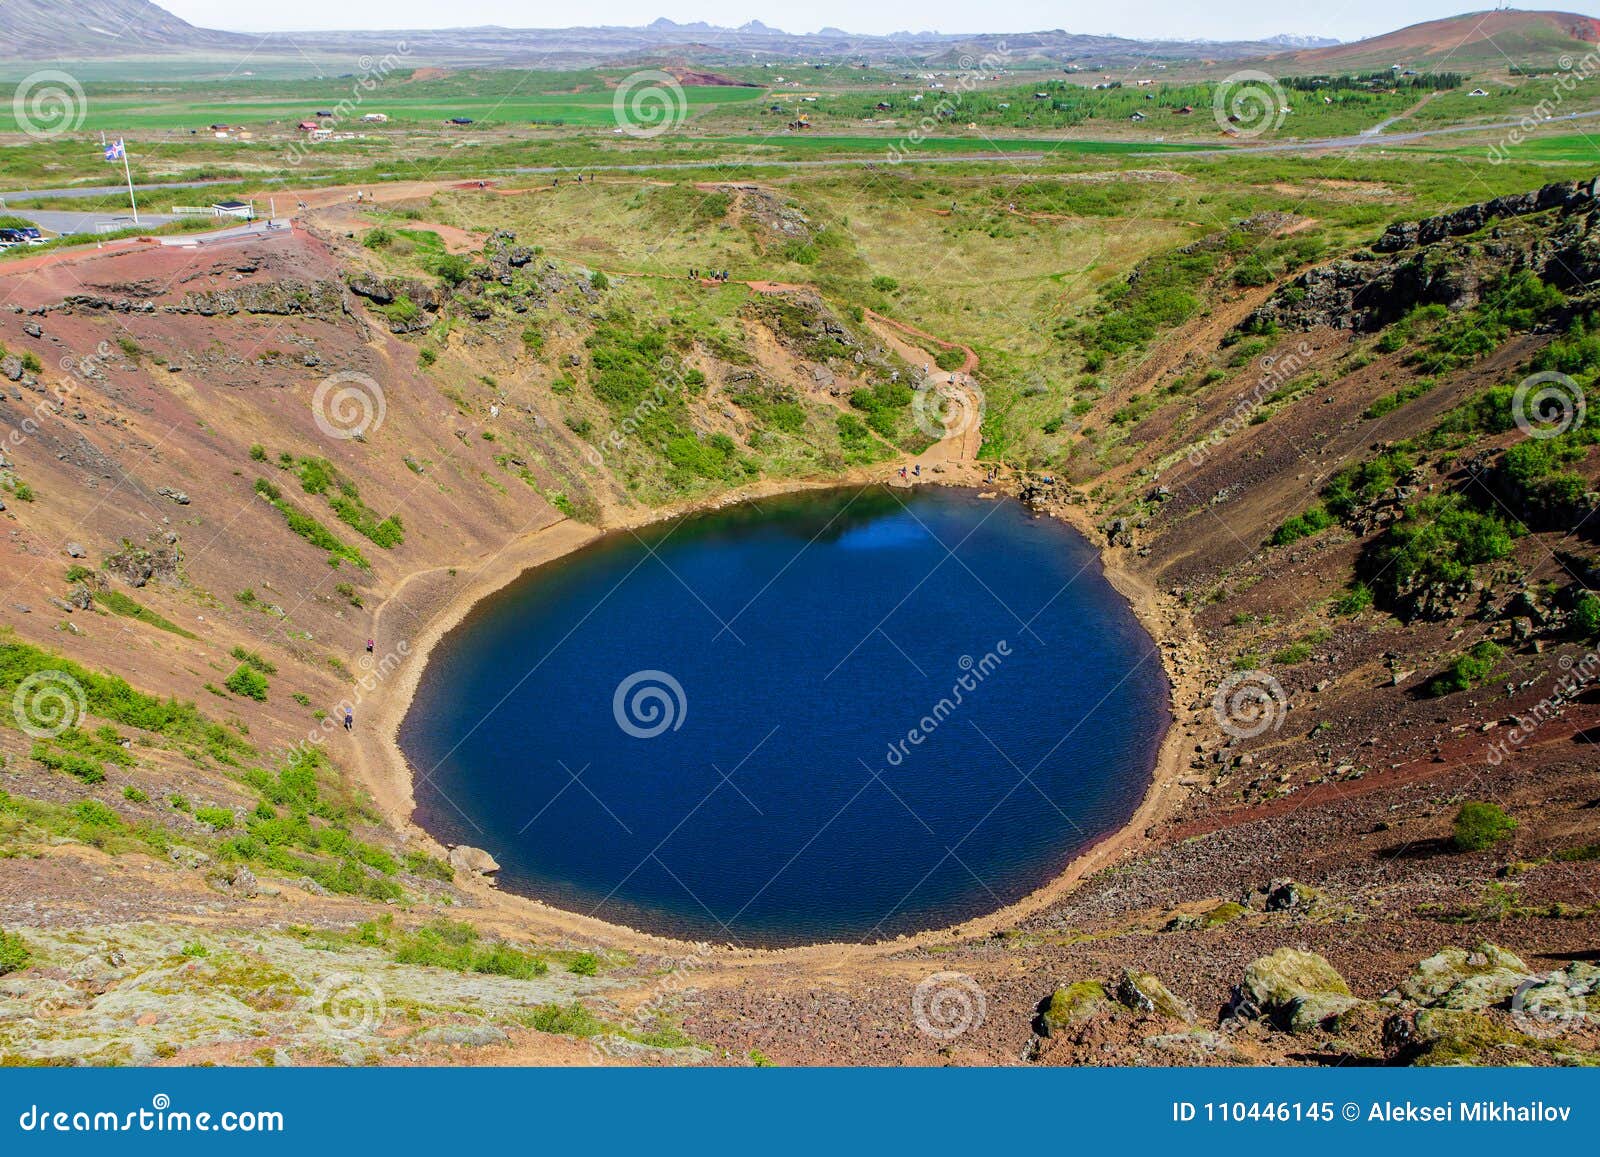 Can You Swim In Kerid Crater Lake In Iceland Kerid Crater Volcanic Crater Lake In Golden Circle Iceland 11 06 2017 Stock Image Image Of Hill Icelandic 110446145